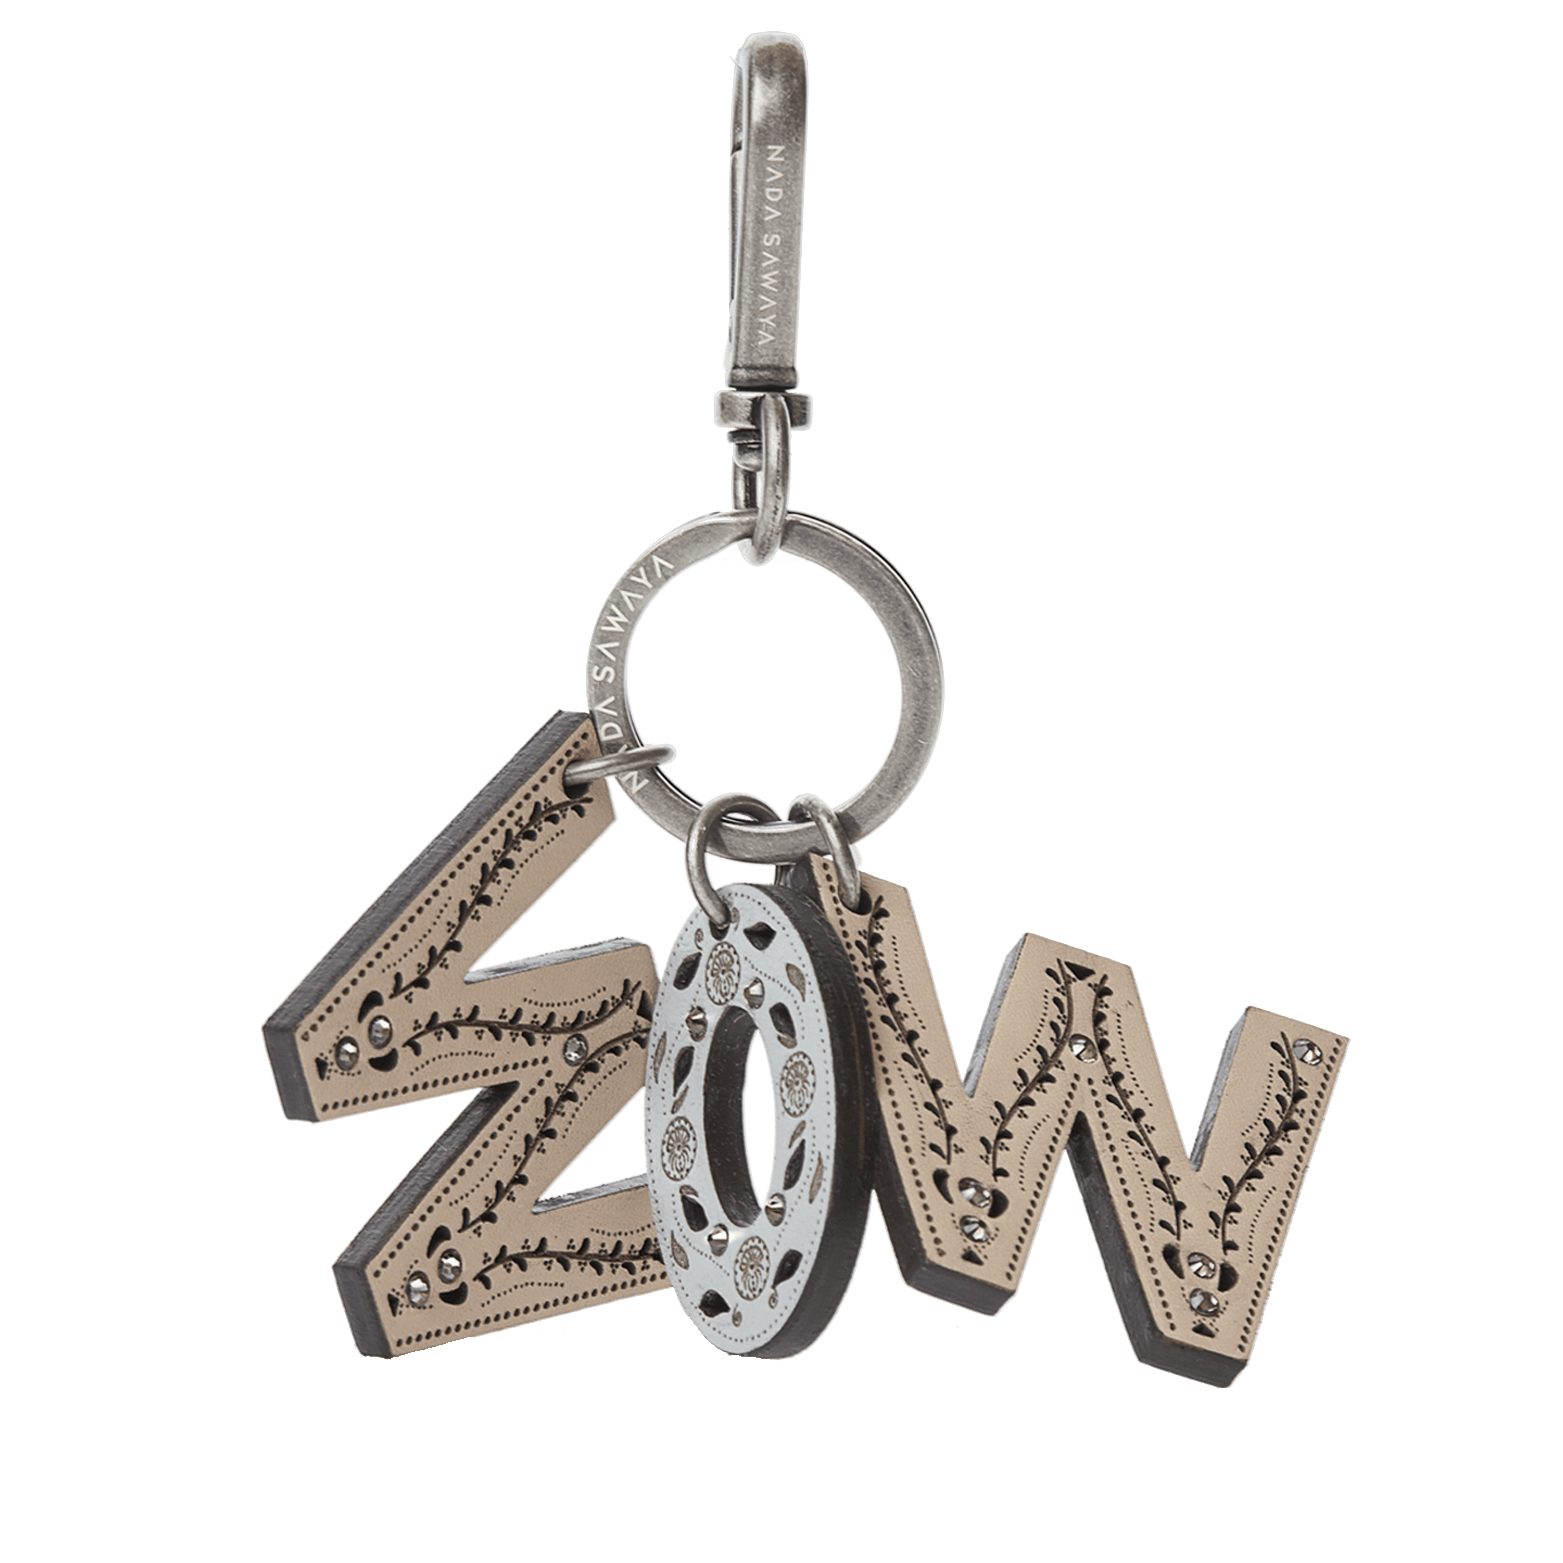 FL by NADA SAWAYA Bag Charm wow-s / Antic Silver / Multicolor 3-Letter Laser Cut Leather Charm